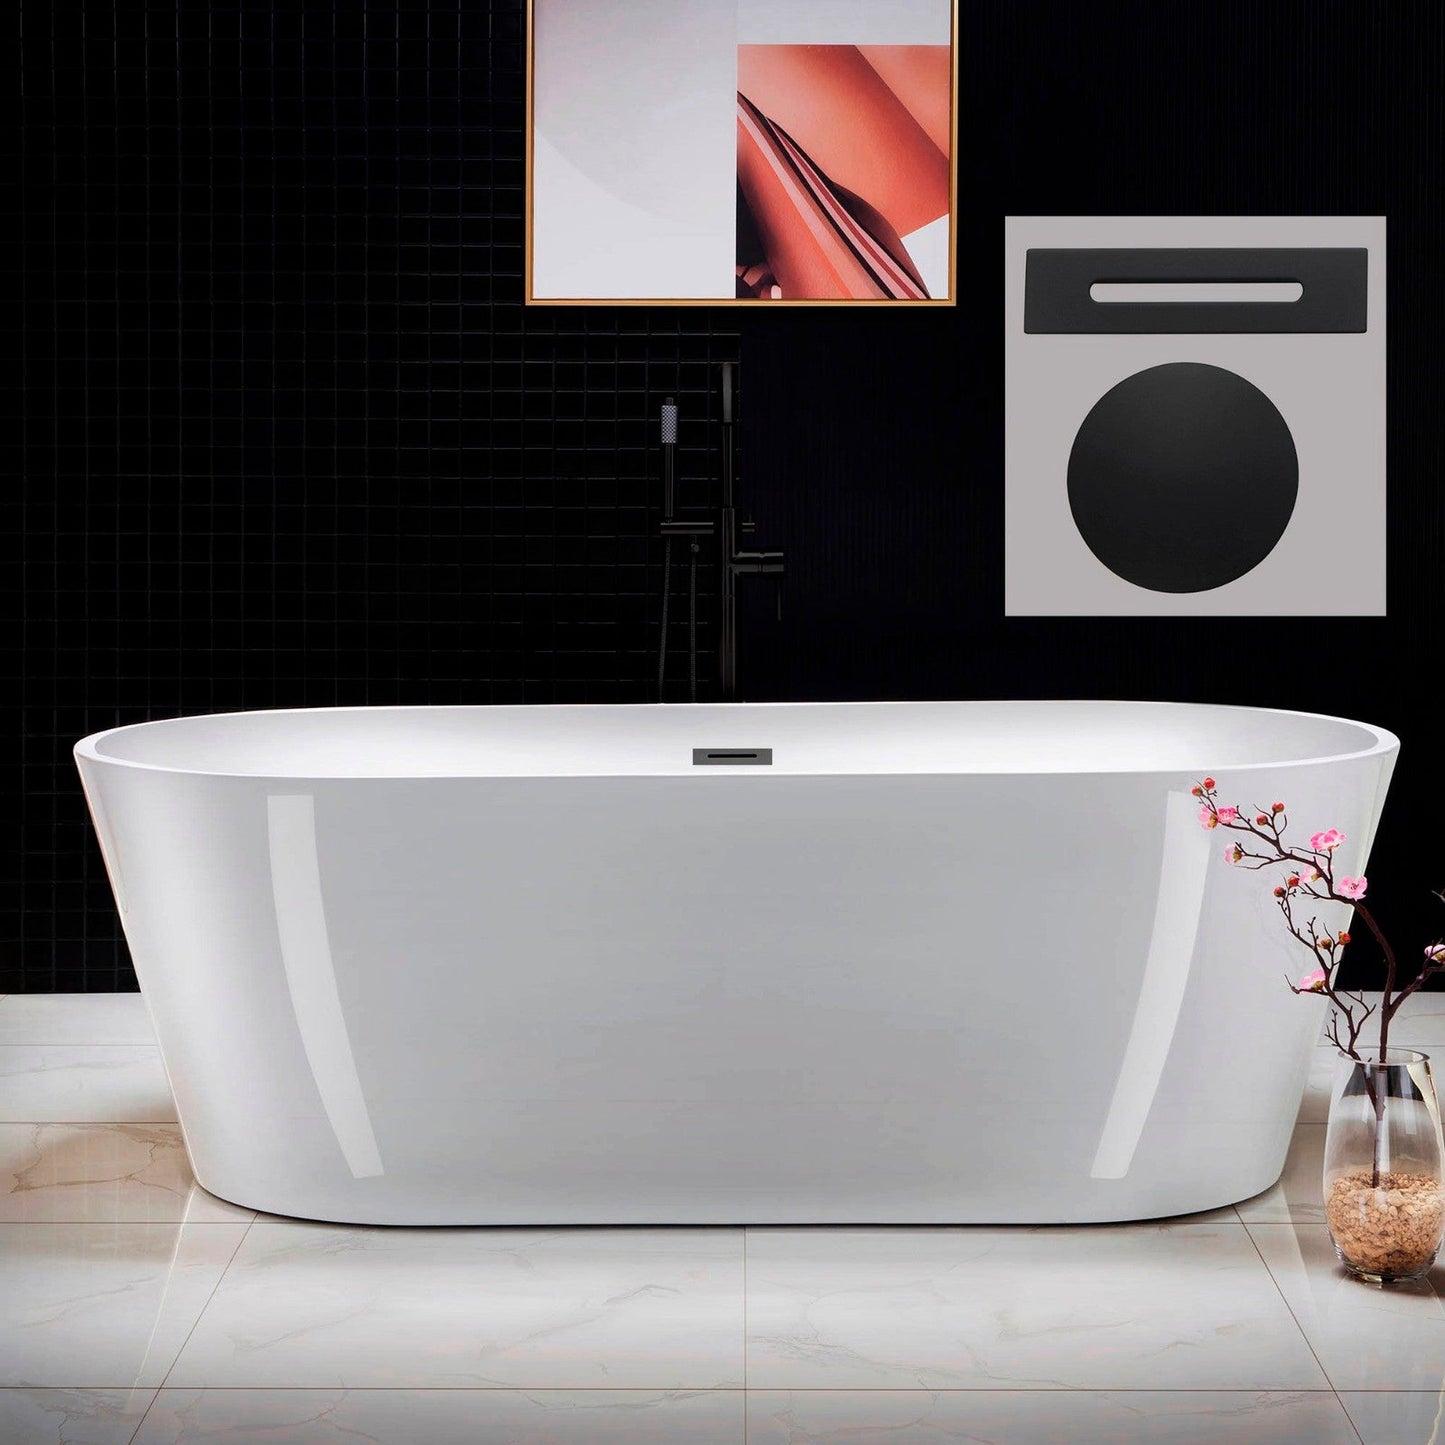 WoodBridge 71" White Acrylic Freestanding Contemporary Soaking Bathtub With Matte Black Drain, Overflow, F0072MBVT Tub Filler and Caddy Tray